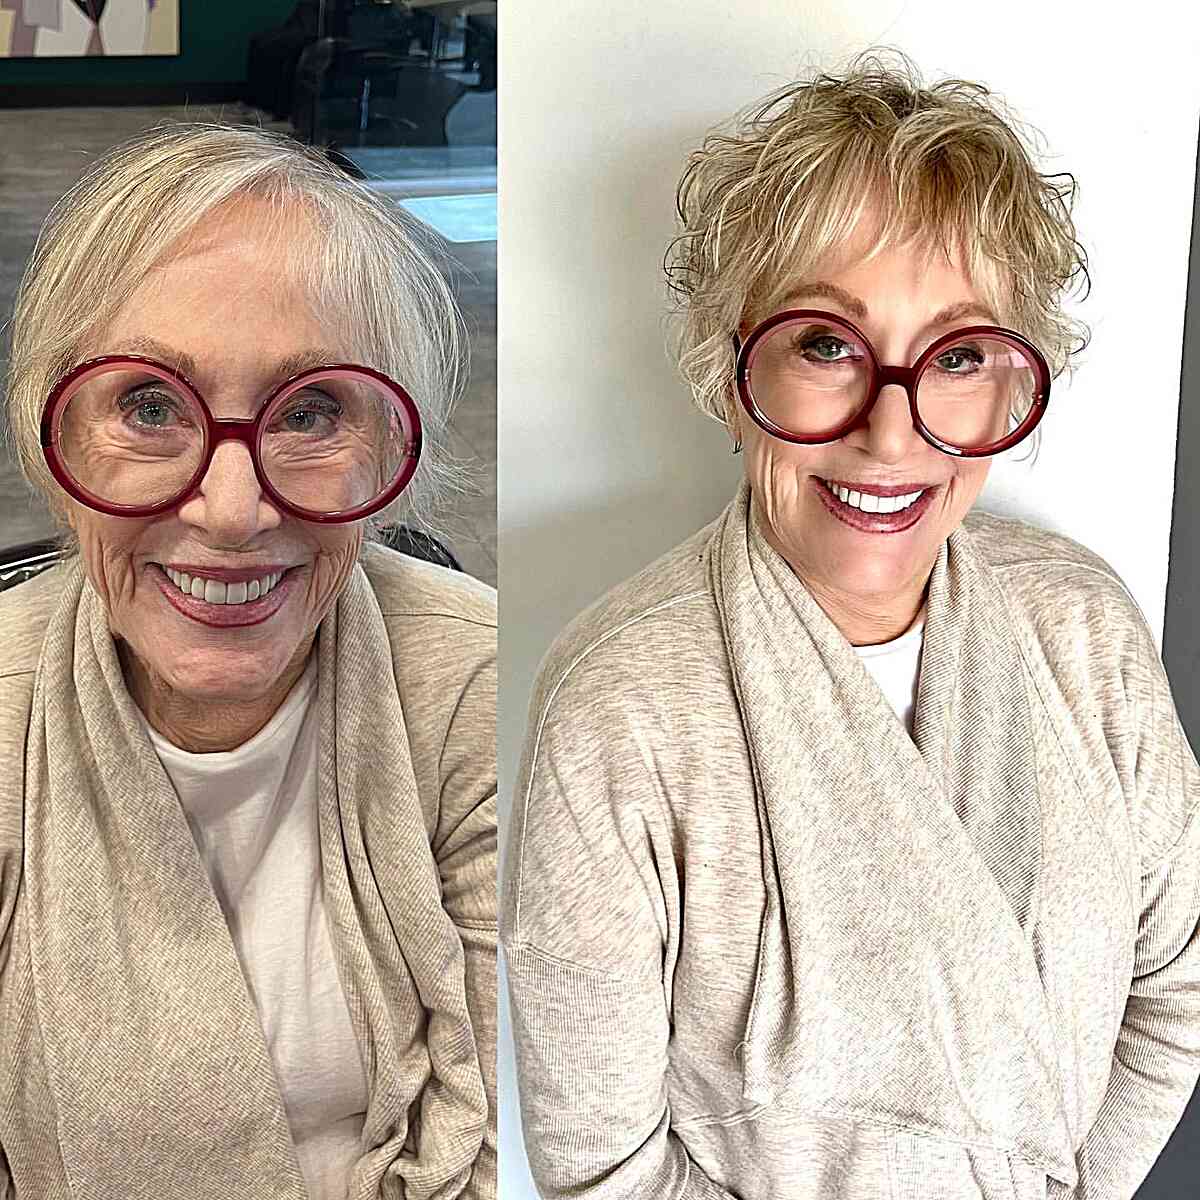 Razor Cut Shag for Natural Curls for Women Aged 70 with Glasses